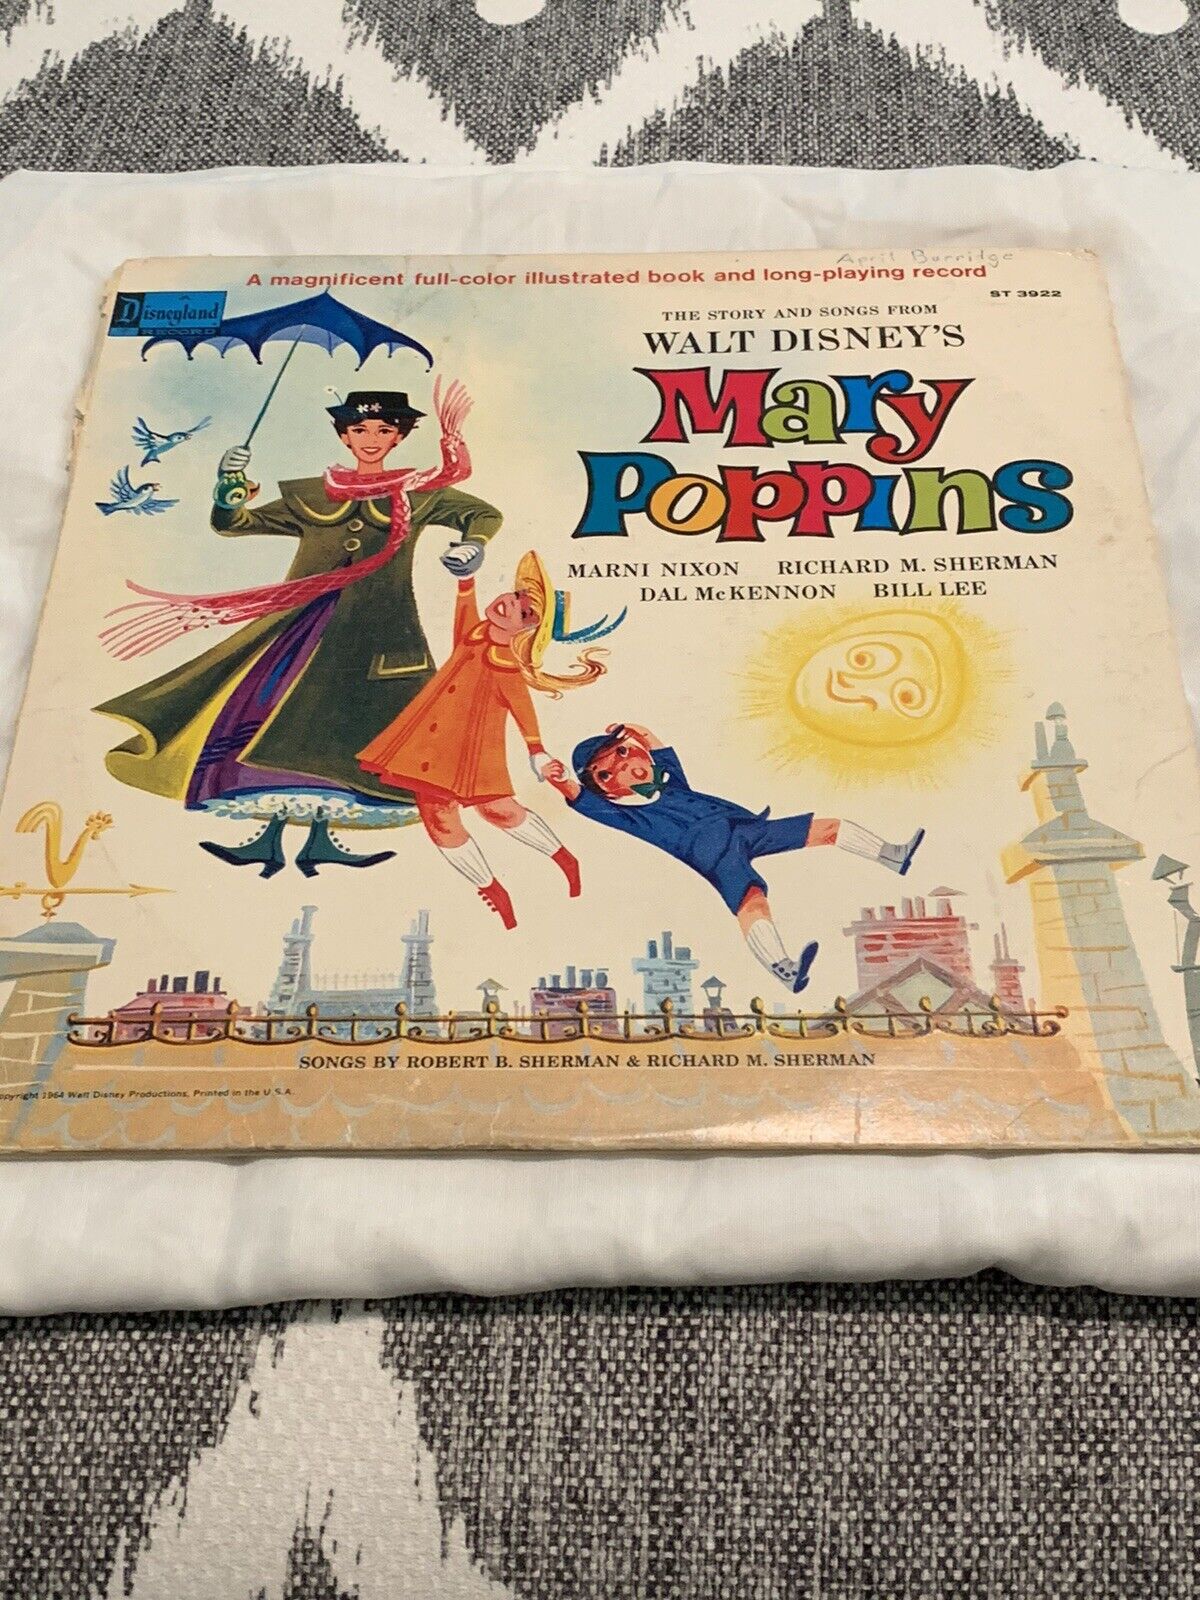 The Story And Songs From Walt Disney’s Mary Poppins Vinyl Record 1964